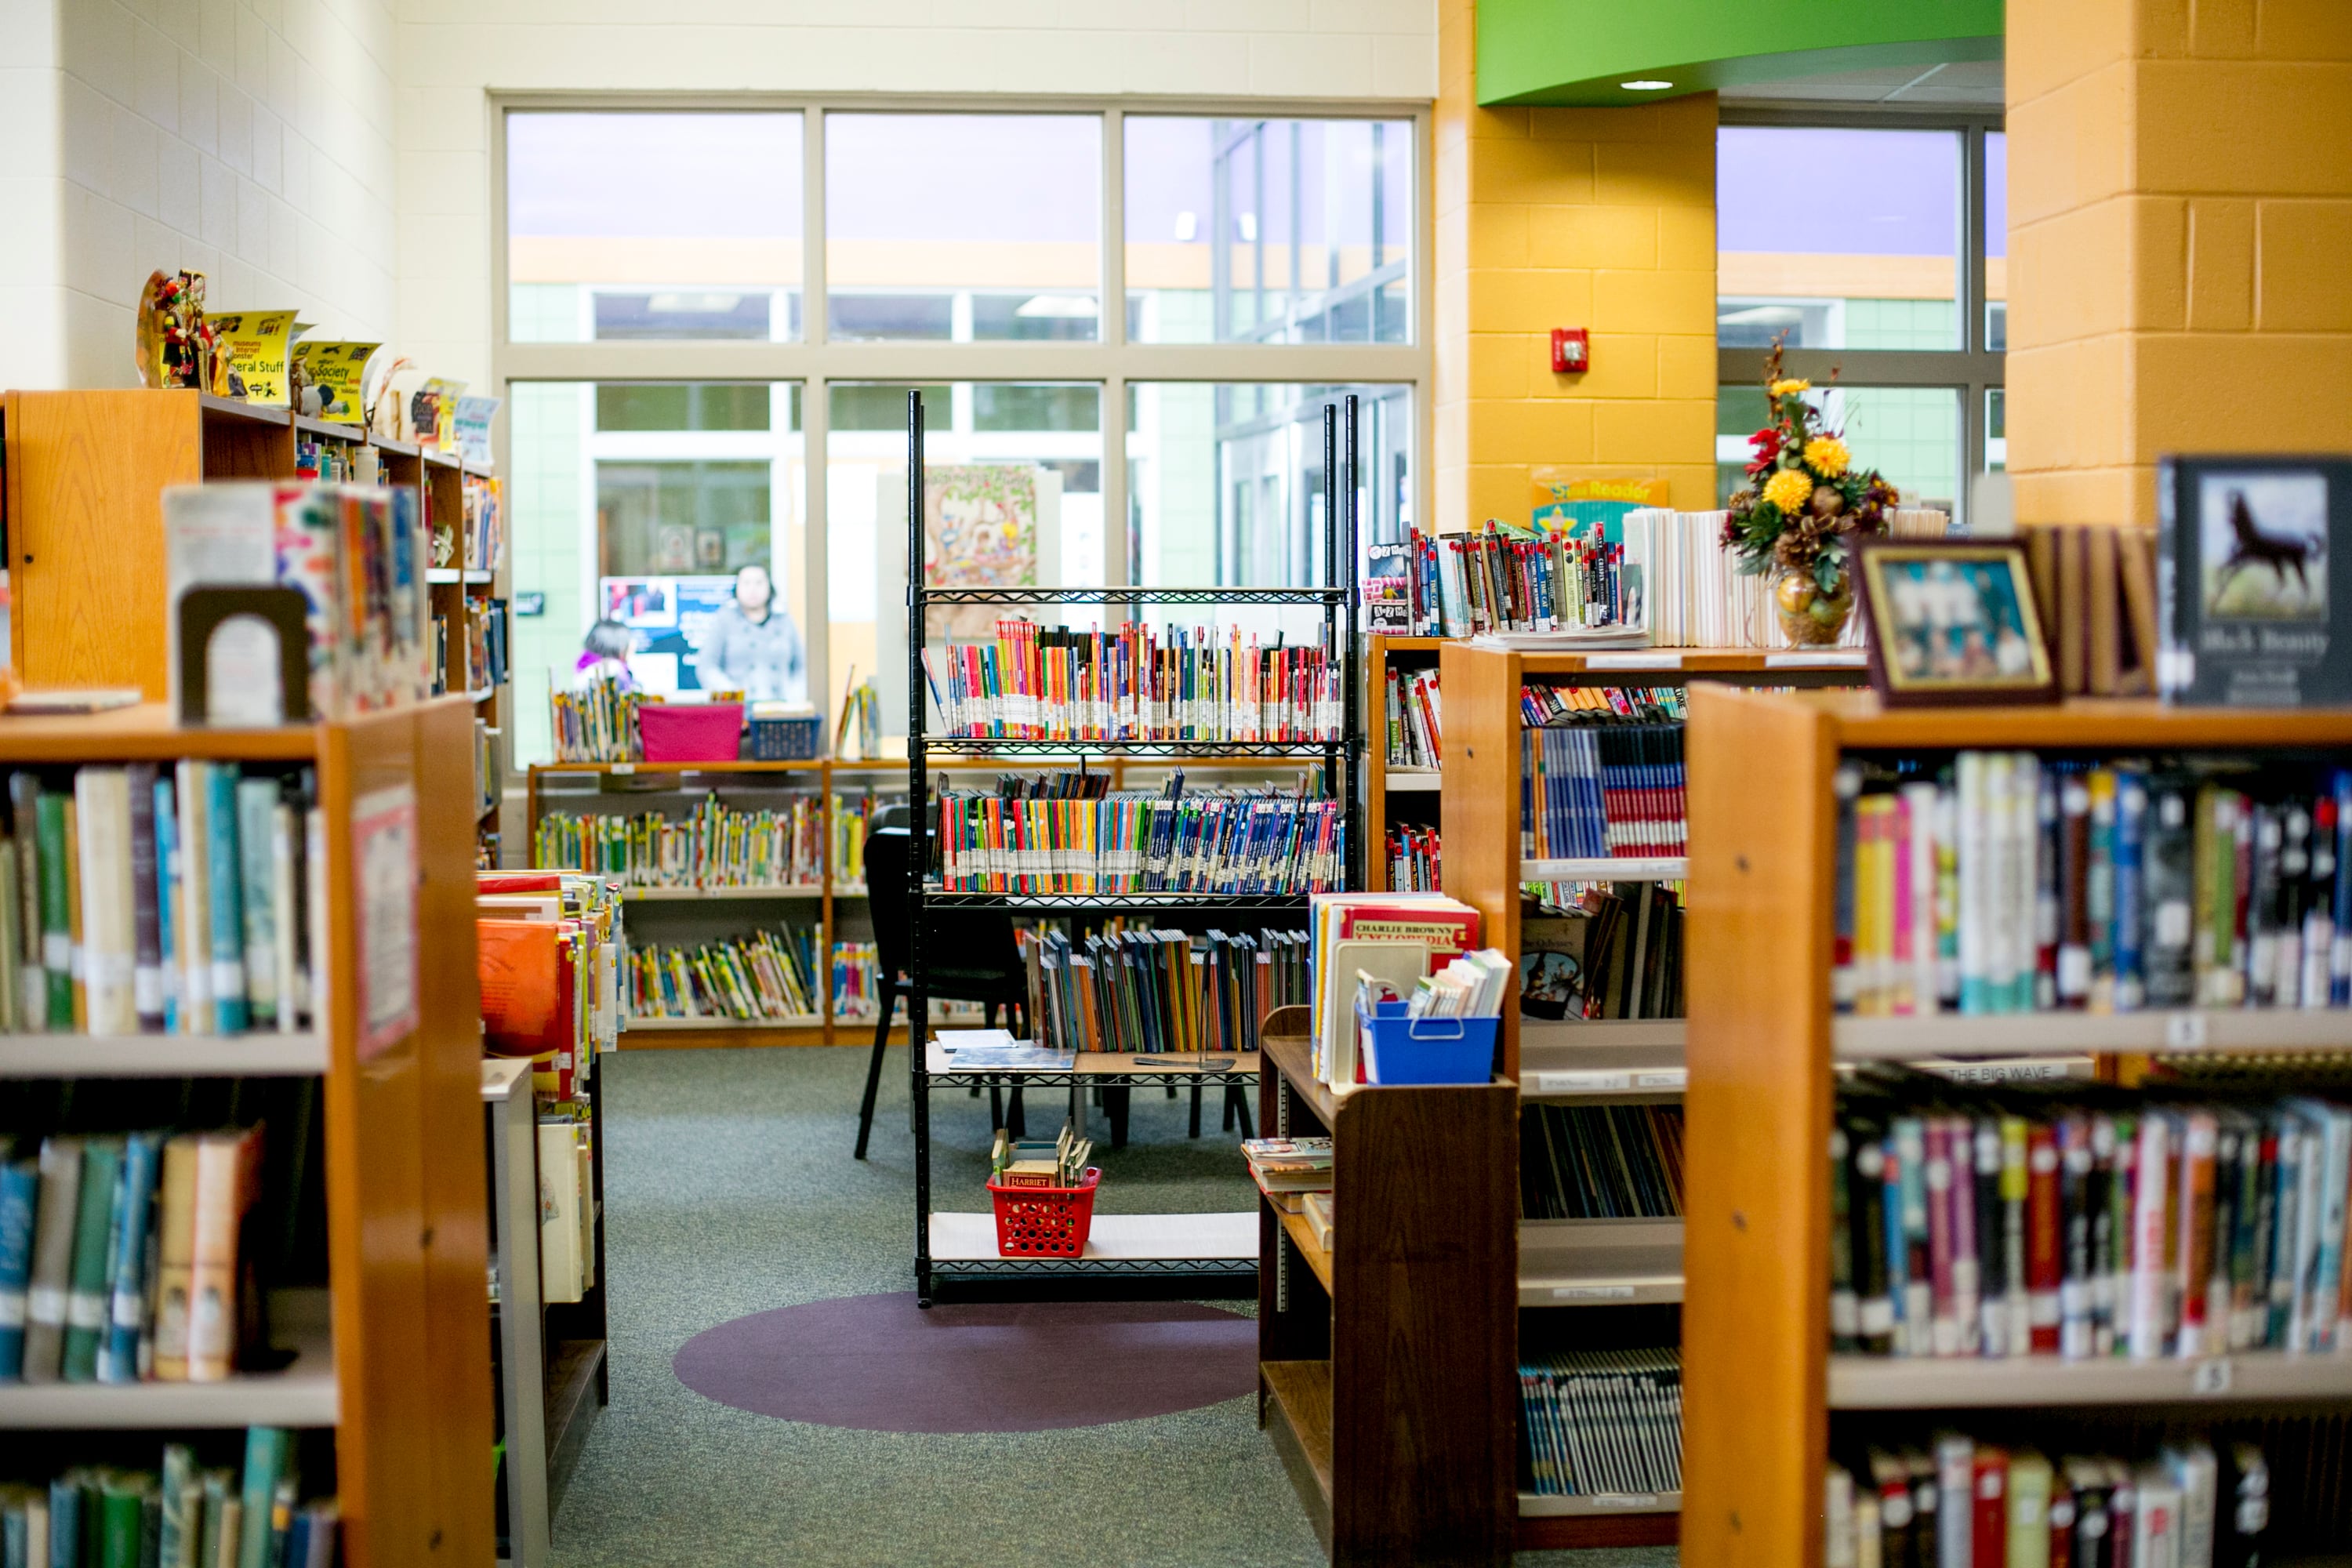 A library with shelves full of colorful books lining the walls with one black chair in the middle of the image. There is a large glass window looking out to another part of the school in the background.